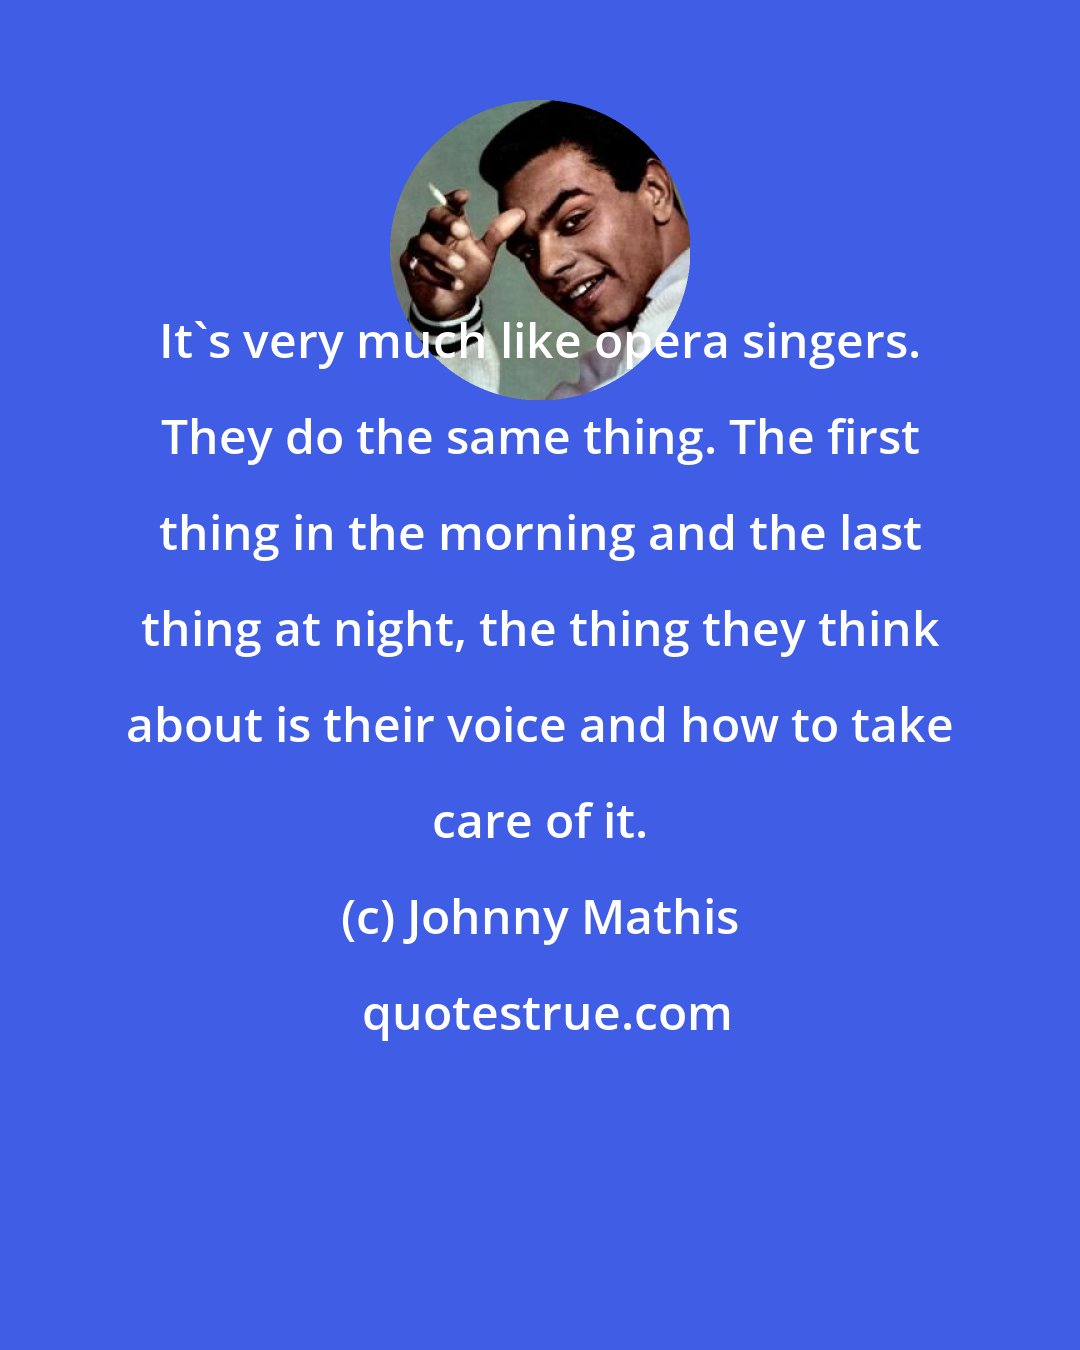 Johnny Mathis: It's very much like opera singers. They do the same thing. The first thing in the morning and the last thing at night, the thing they think about is their voice and how to take care of it.